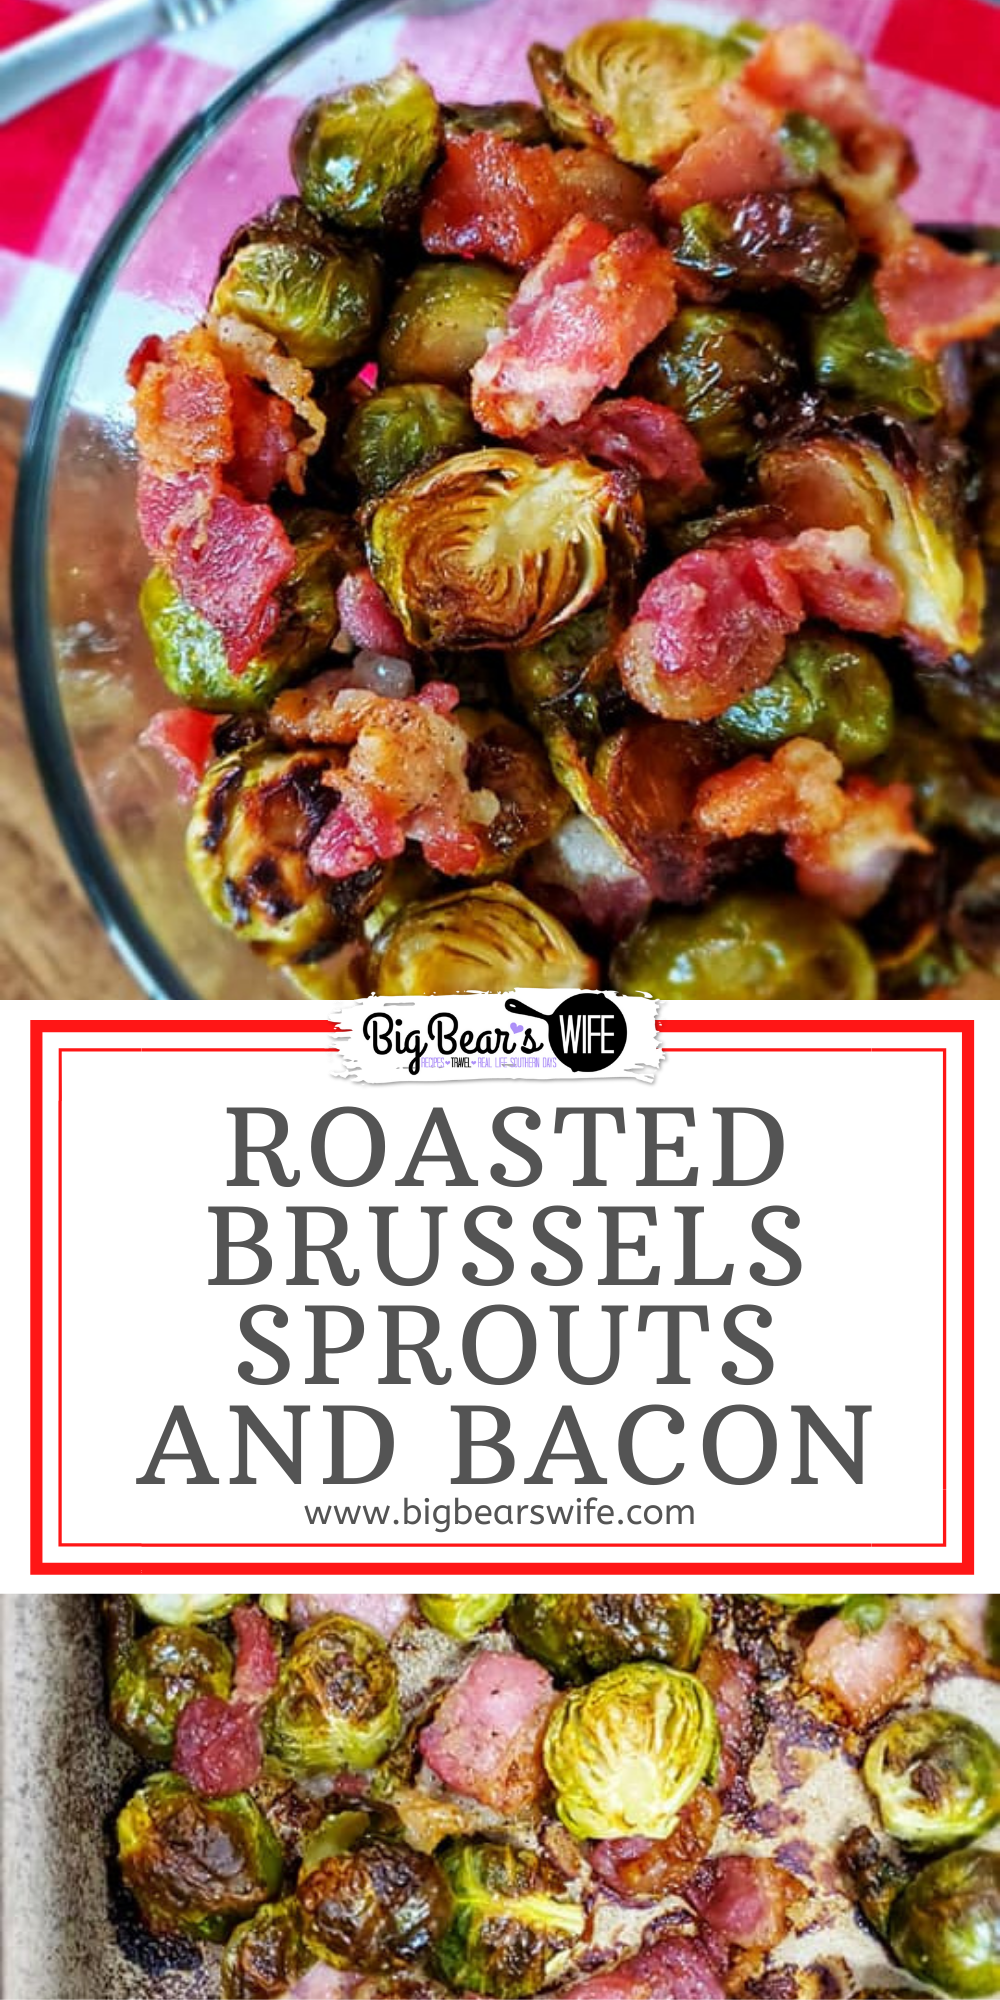 Roasted Brussels Sprouts and Bacon are a great side dish and perfect for weeknight or weekend dinners! In this post I'll teach you how to pick the best brussels sprouts and how to make a Roasted Brussels Sprouts and Bacon dish that you'll love! These sprouts only take about 30 minutes in the oven and they're so good! via @bigbearswife